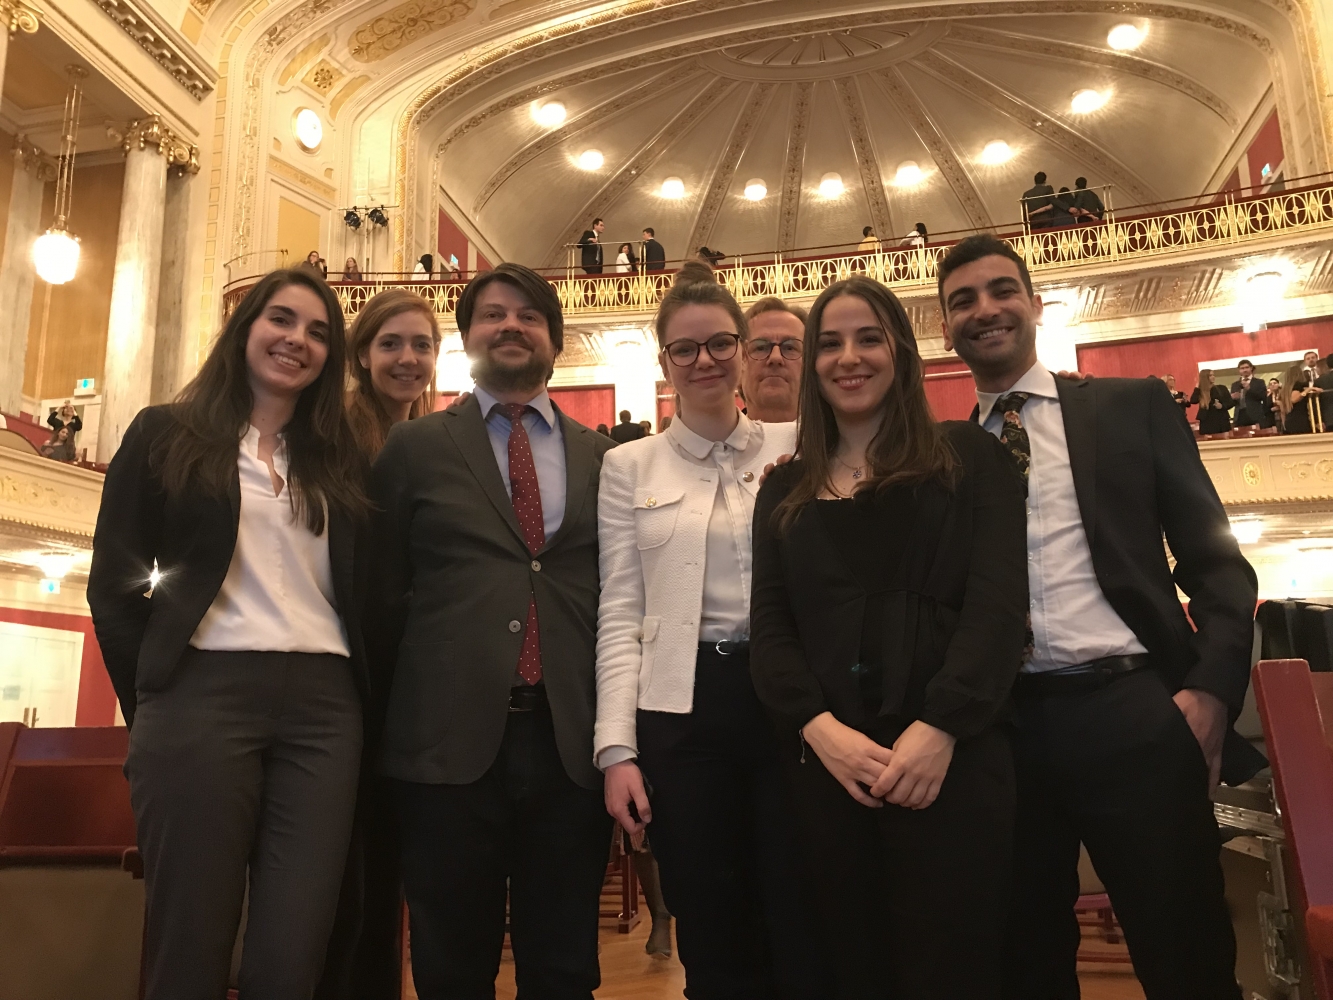 The 25th Annual Vis International Commercial Arbitration Moot in Vienna